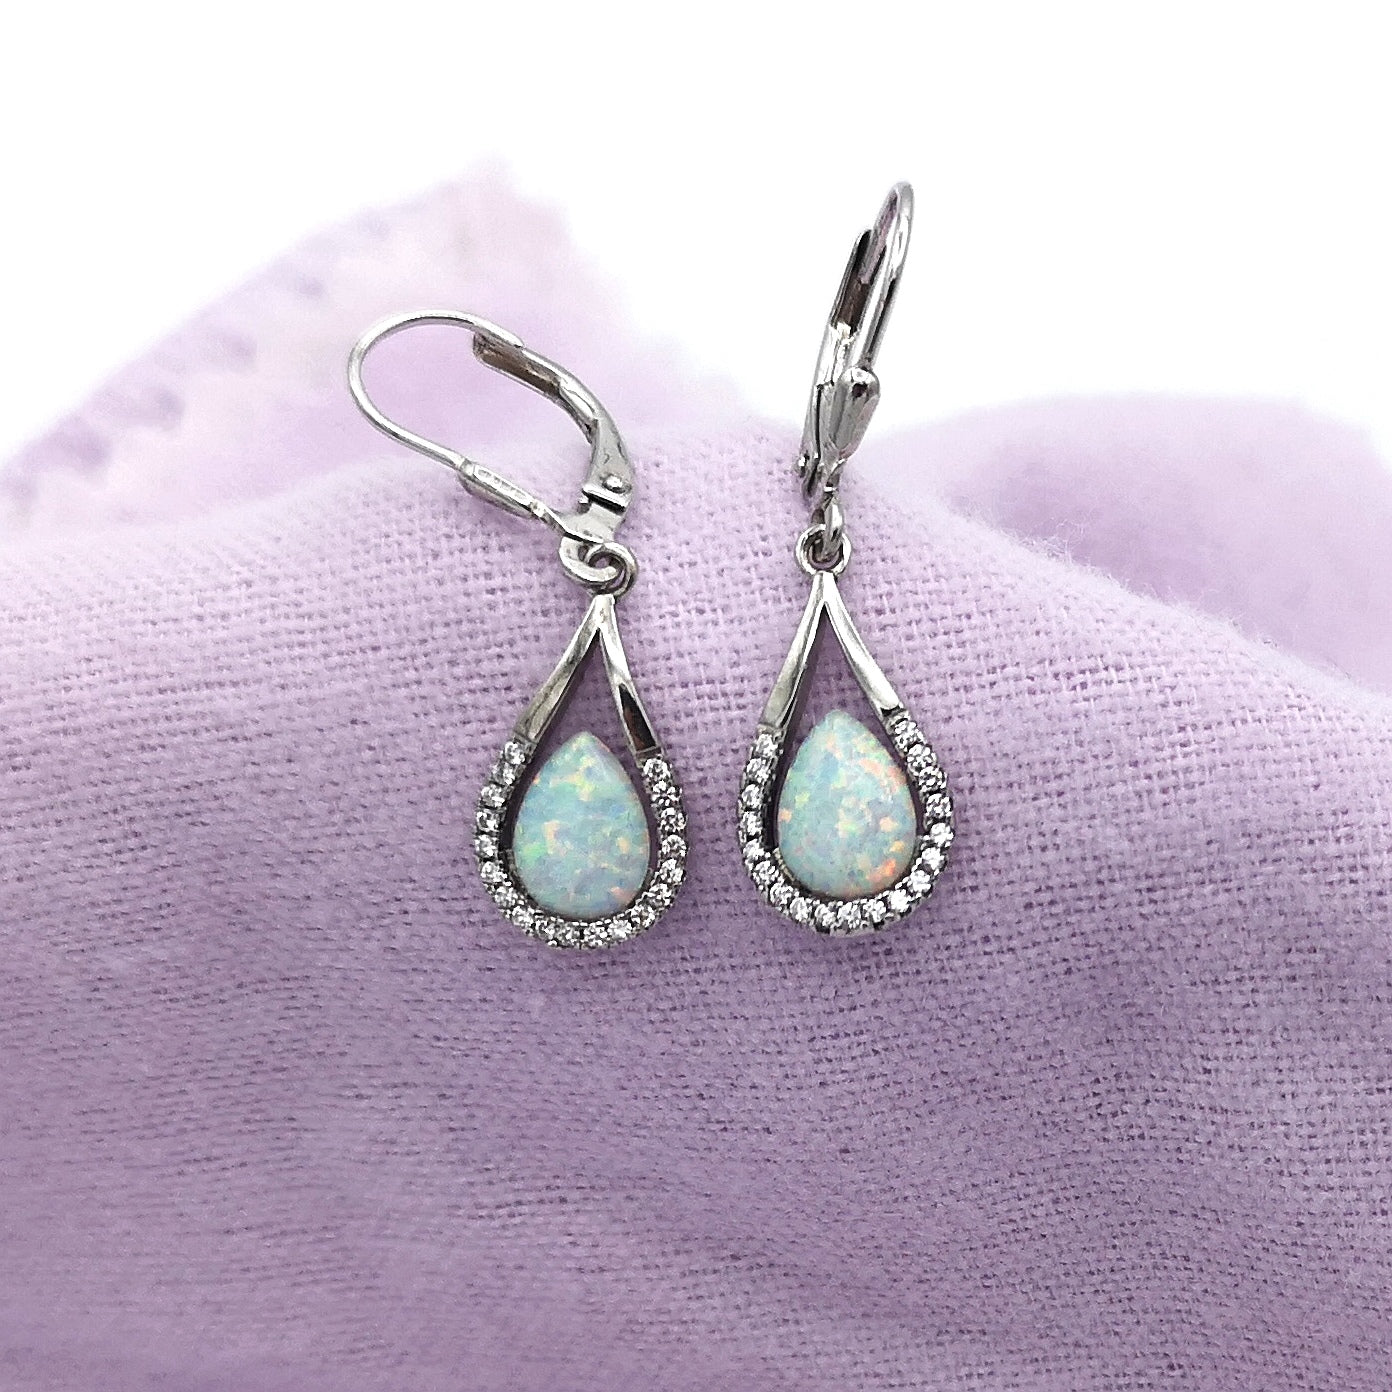 A pair of silver pear cut opal and cz halo drop earrings on a purple napkin